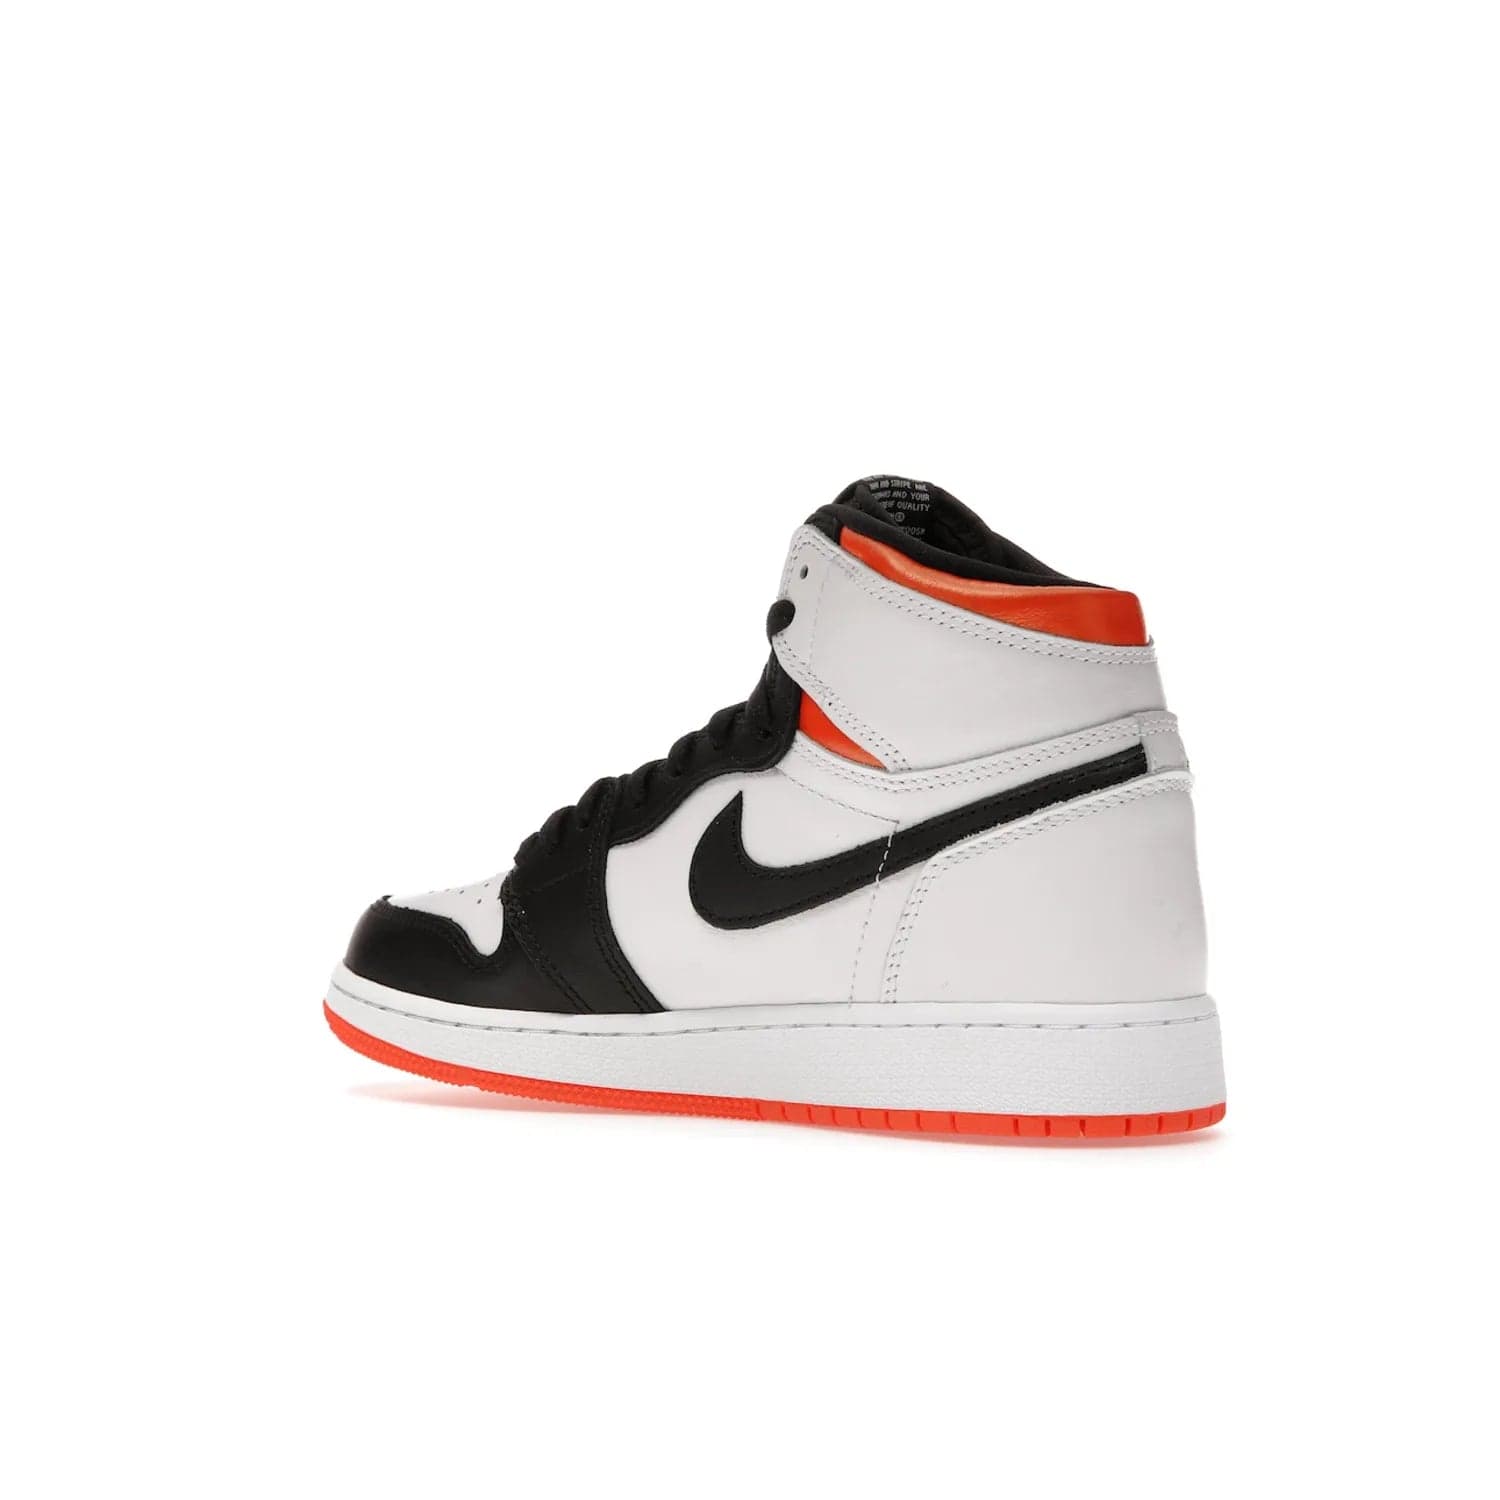 Jordan 1 High OG Electro Orange (GS) - Image 23 - Only at www.BallersClubKickz.com - The Air Jordan 1 High OG Electro Orange GS is the ideal shoe for kids on the go. Featuring white leather uppers, black overlays, and bright orange accents, it's sure to become a favorite. A great mix of classic style and vibrant colors, the shoe delivers air cushioning for comfort and hard orange rubber for grip. Release on July 17th, 2021. Get them a pair today.